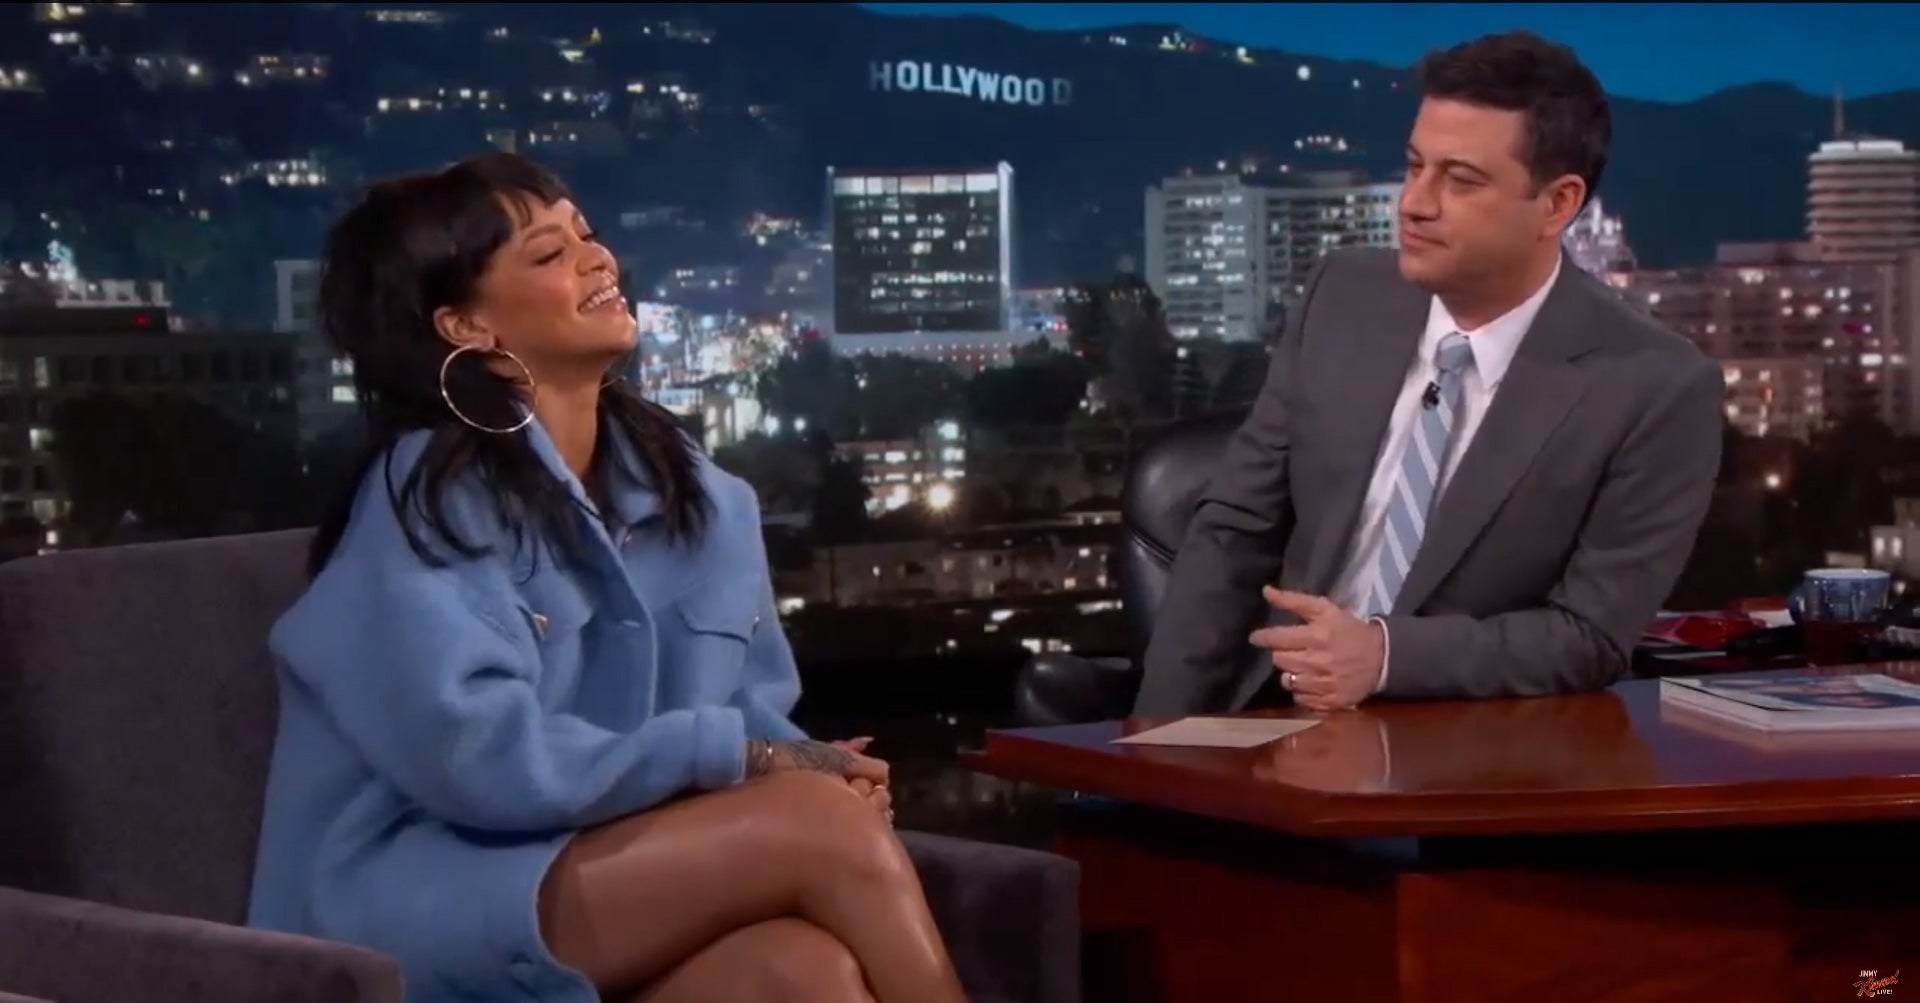 Rihanna Pranked Jimmy Kimmel for April Fool's Day, And It's Hilarious!
